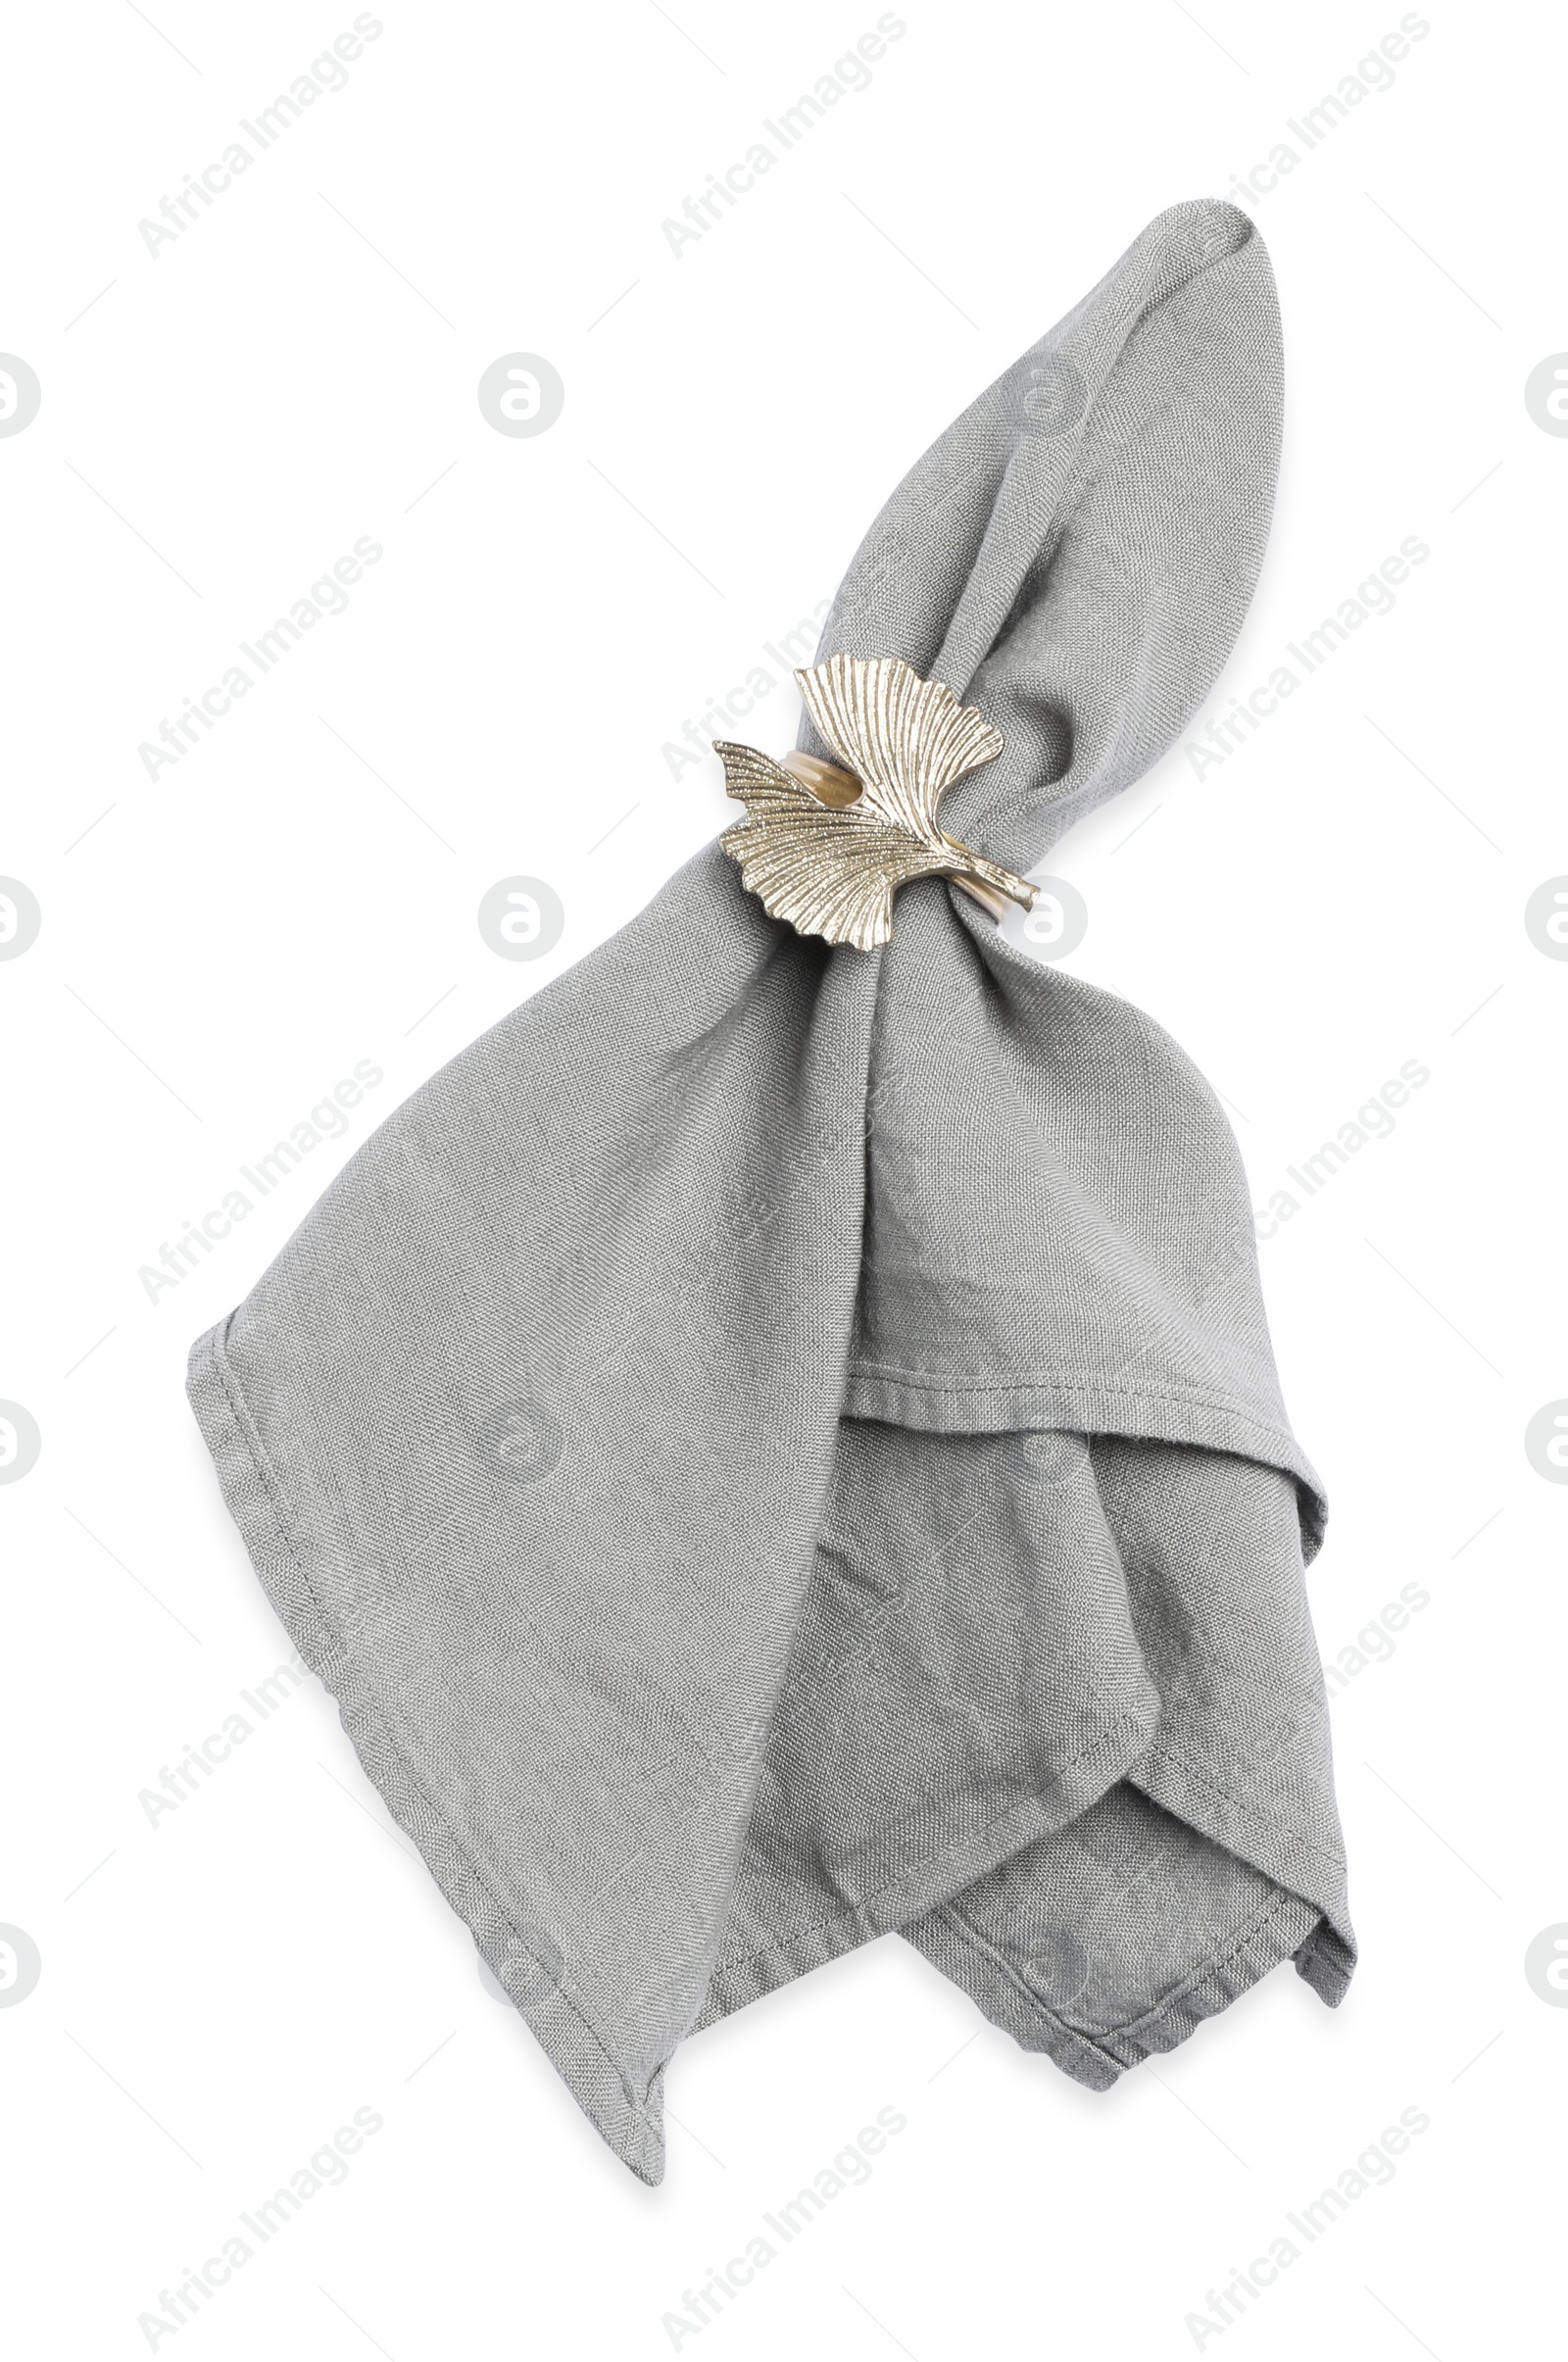 Photo of Fabric napkin with decorative ring for table setting on white background, top view